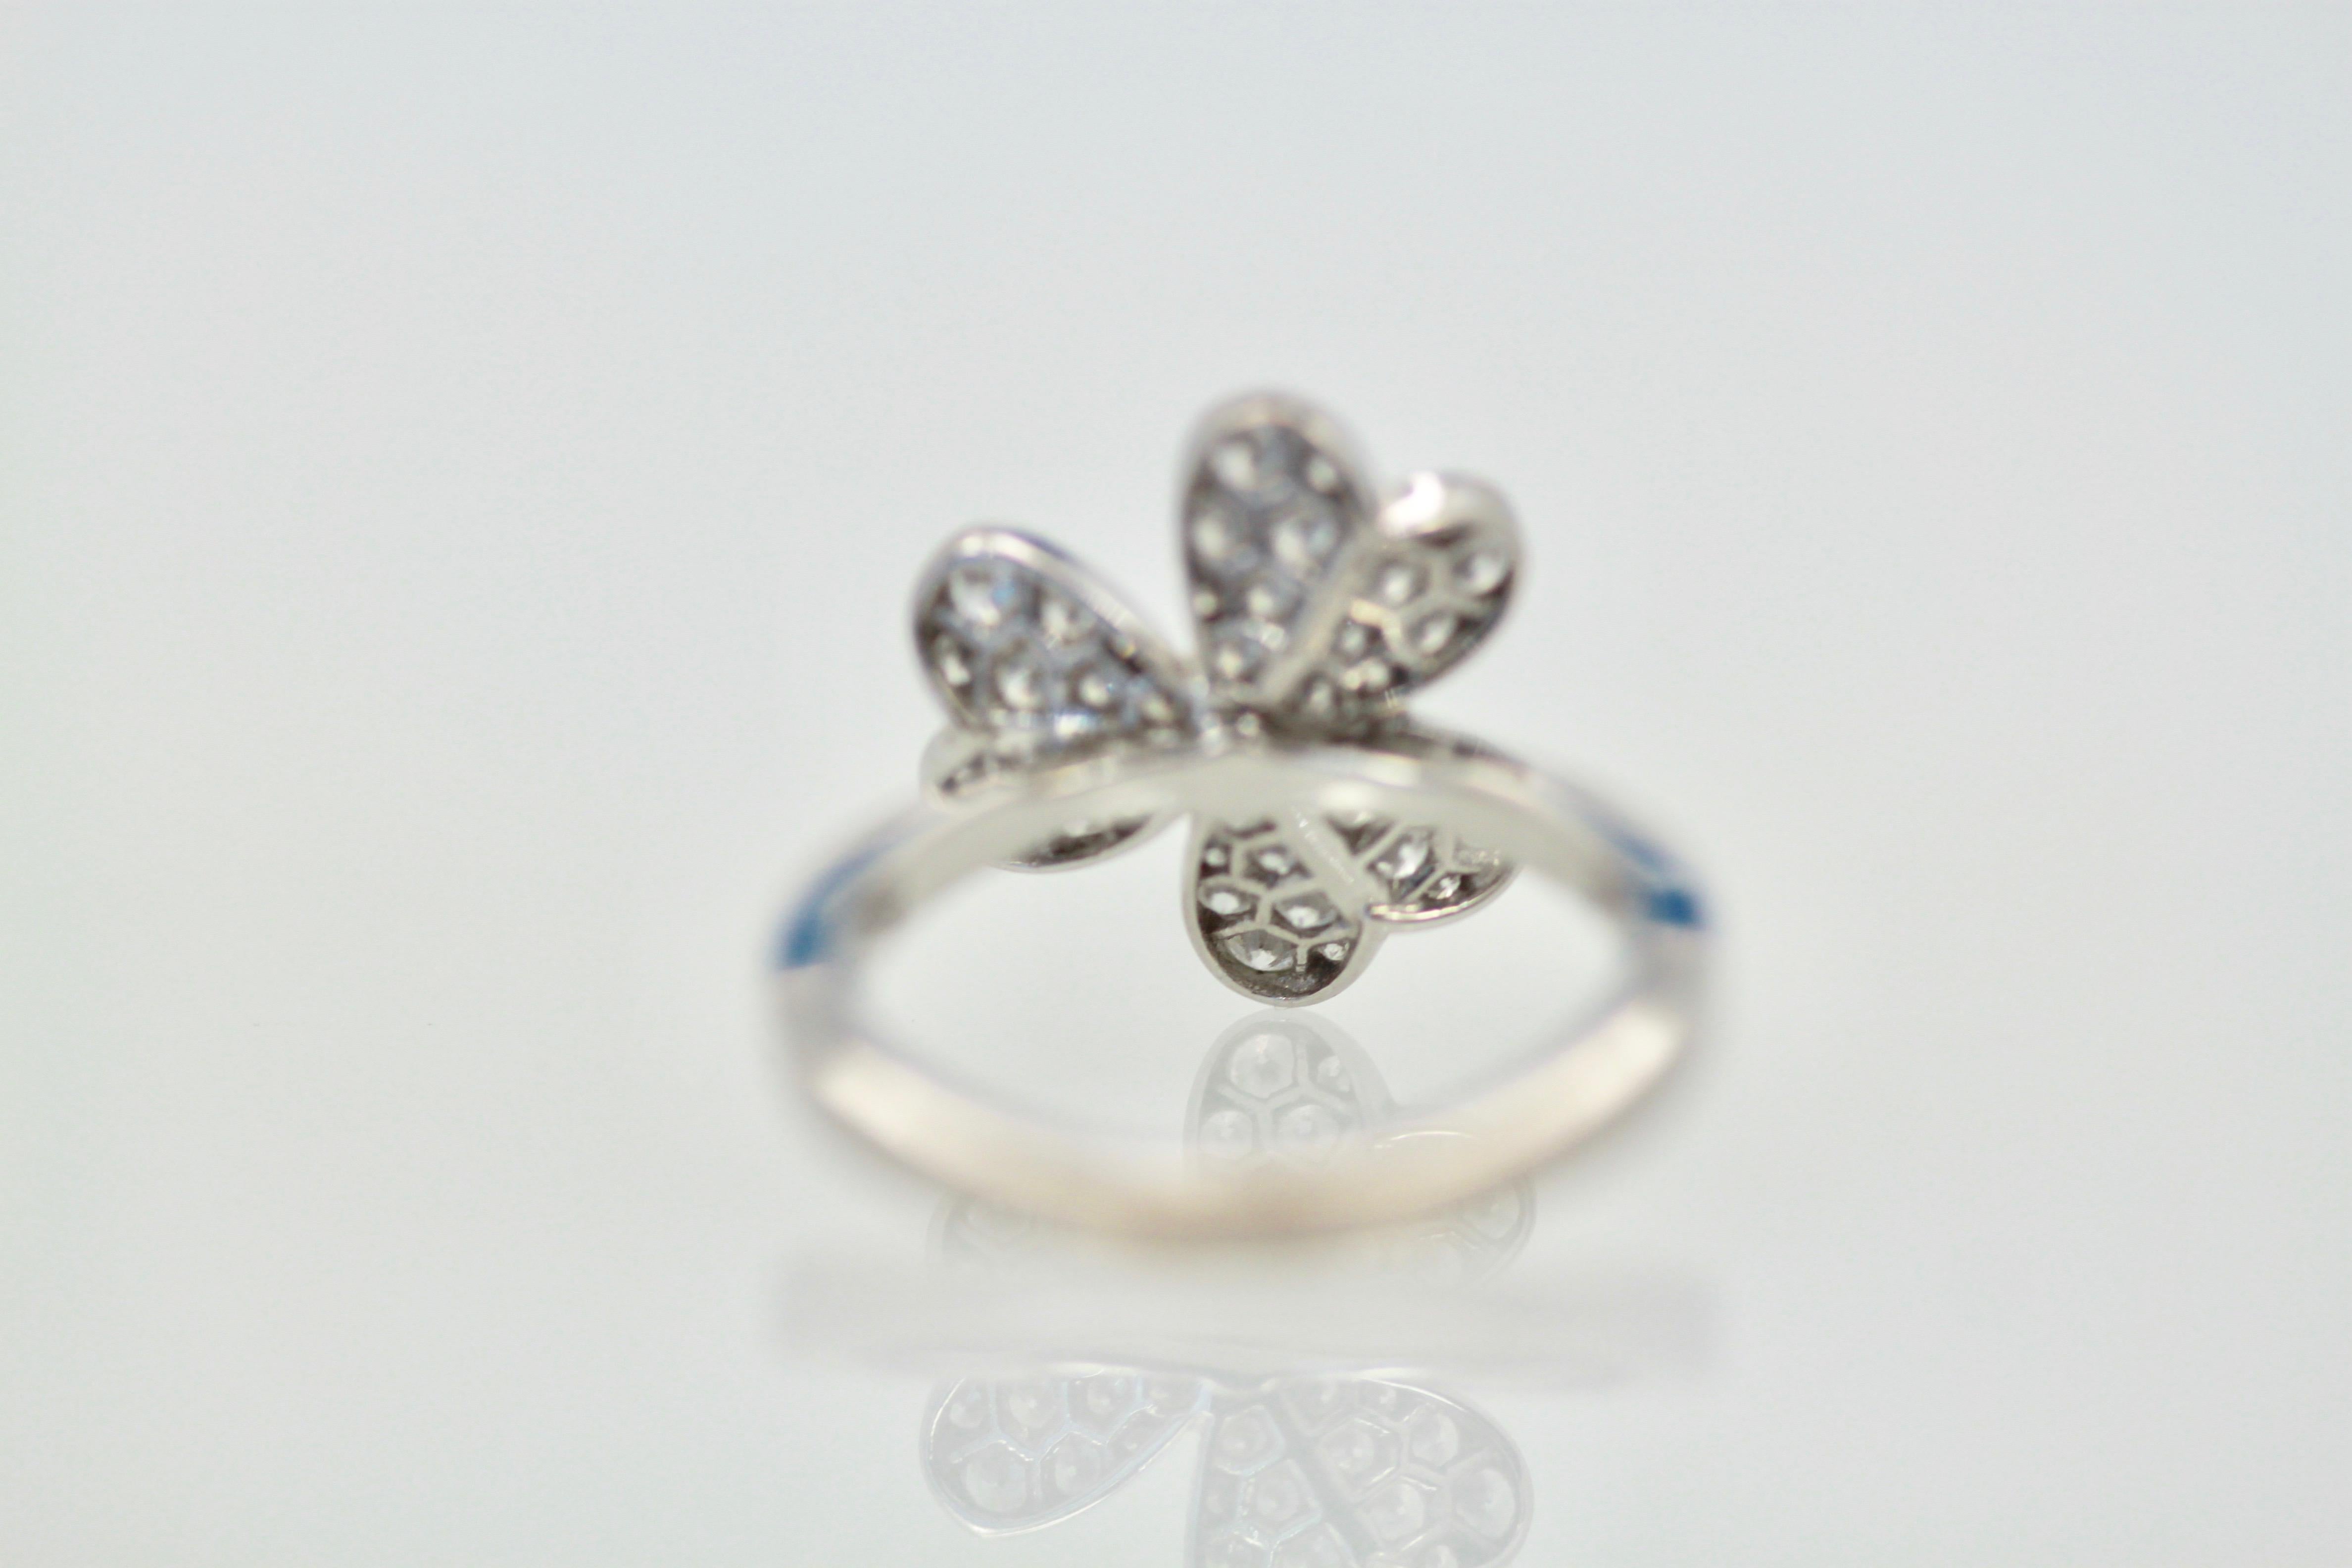 This Frivole Ring is the single flower ring it is signed numbered and comes with it's original box.  The size is 1.51 cm in diameter weights 5.08 grams and is size 54 US 6.5.  This Frivole ring is like petals in the wind delicate and lovely.